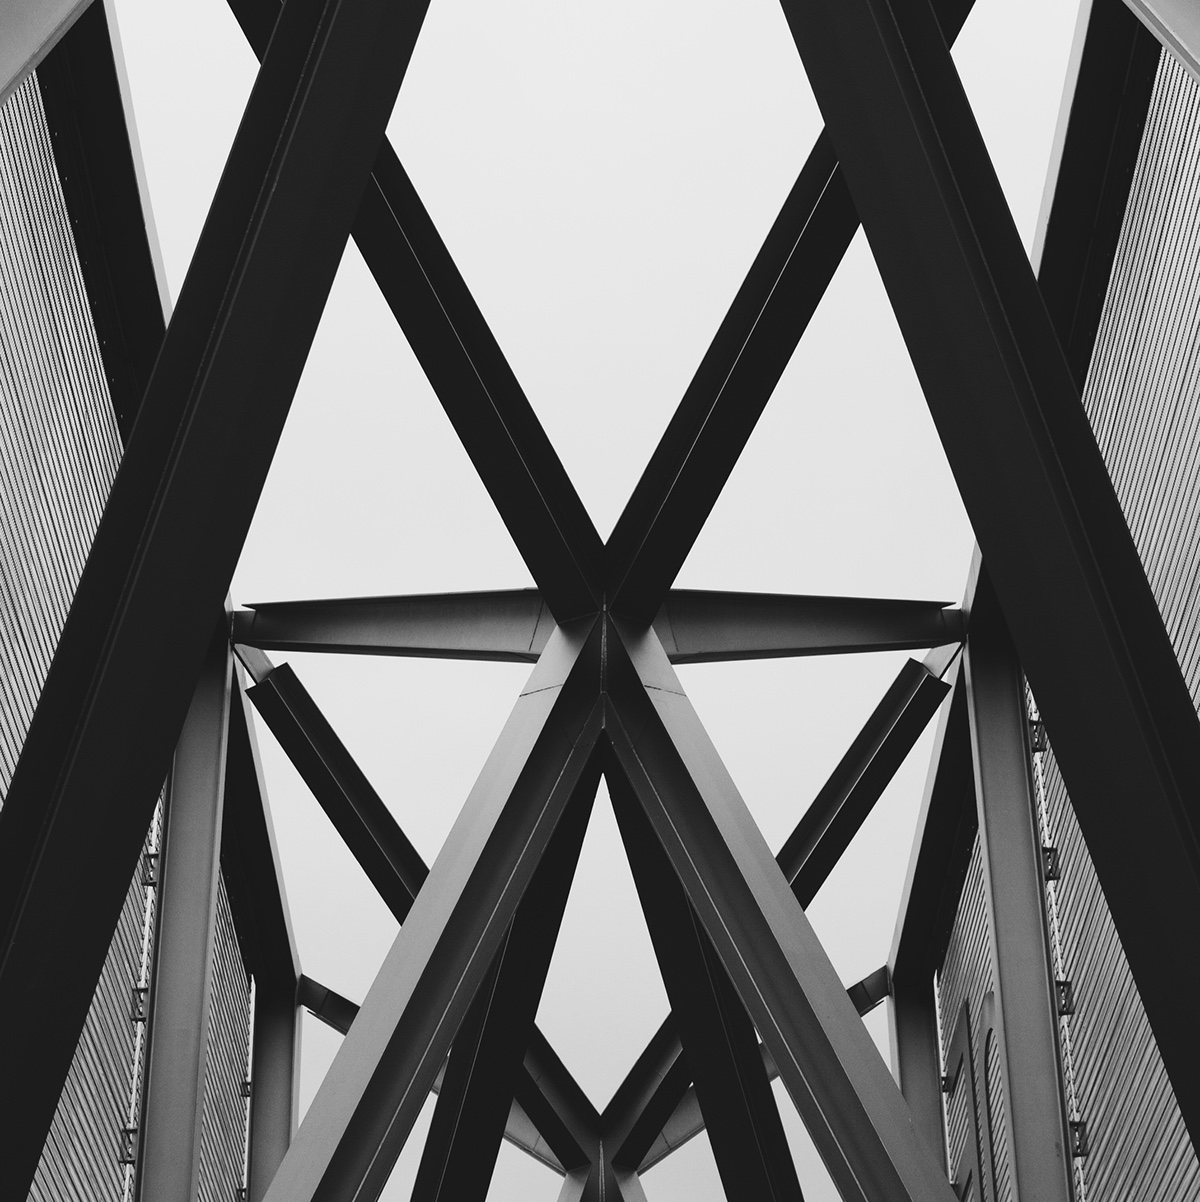 Paris building library france black and white symmetry reflection